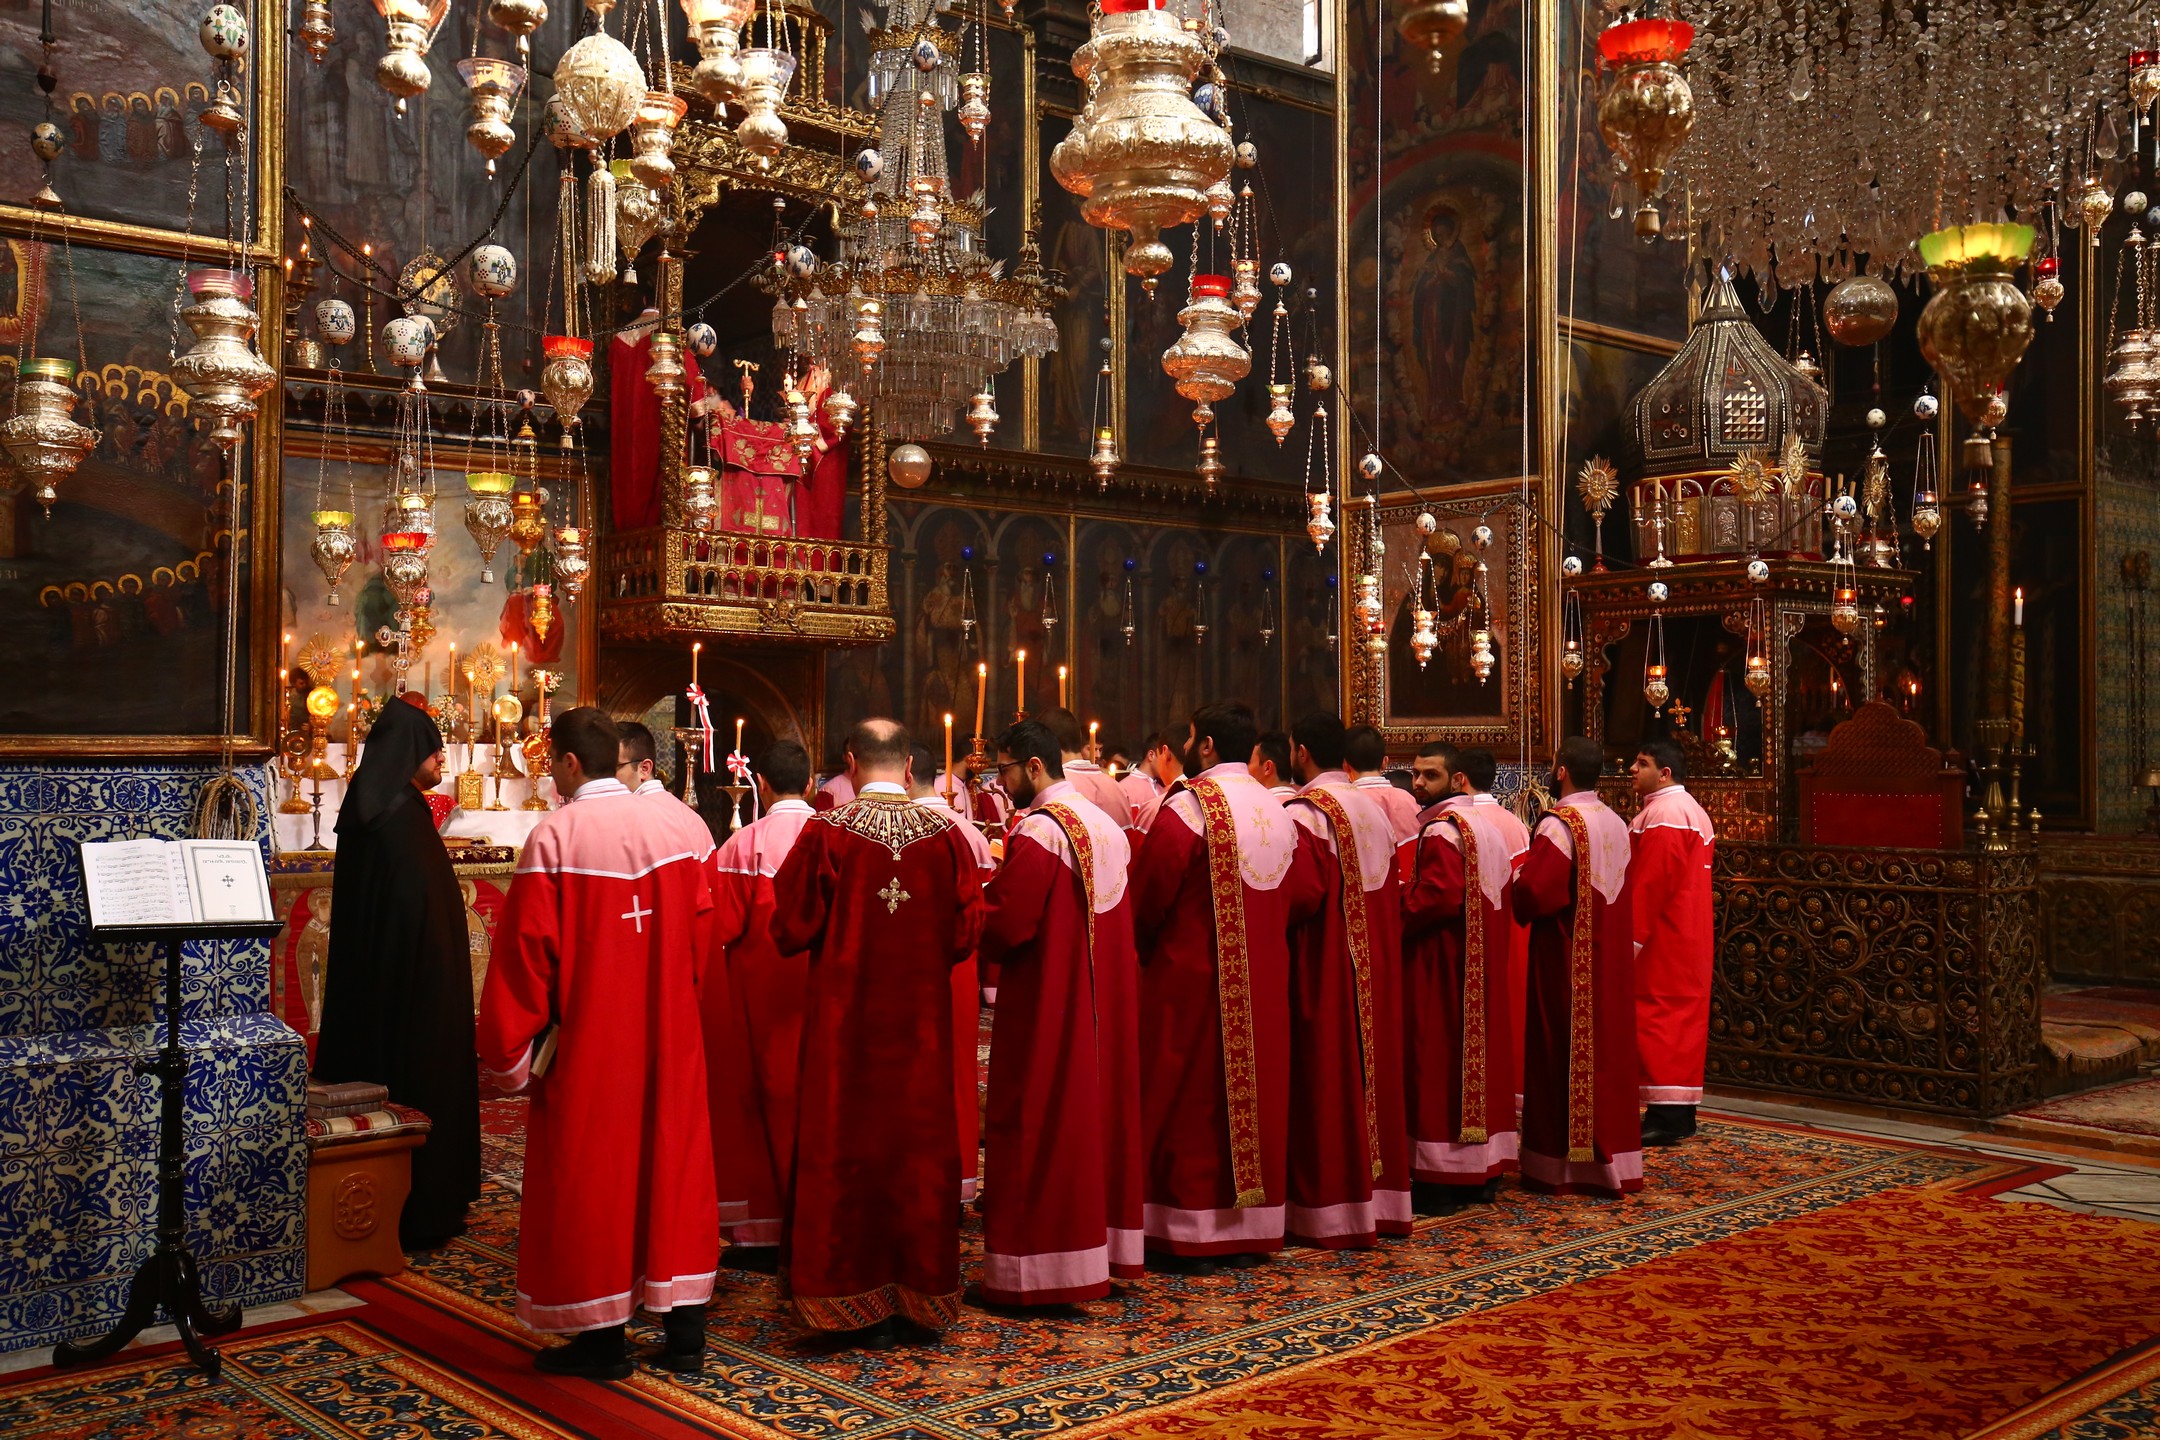 Feast day of the Armenian Orthodox Patriarchate of Jerusalem